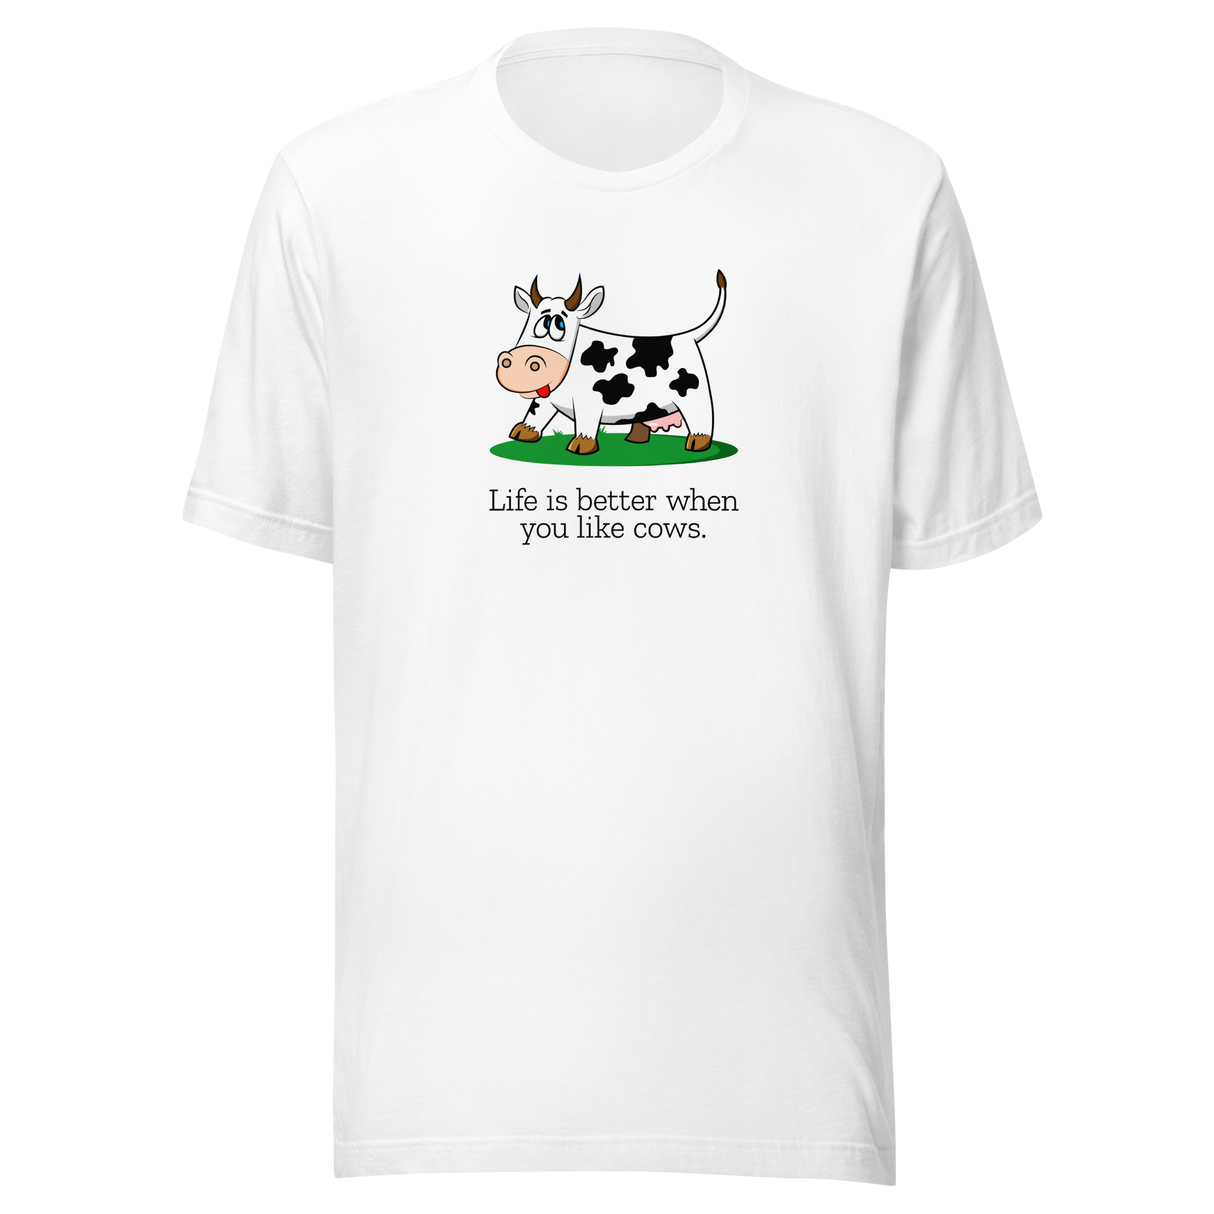 life-is-better-when-you-like-cows-cow-tee-animal-t-shirt-farm-tee-farm-t-shirt-life-tee#color_white